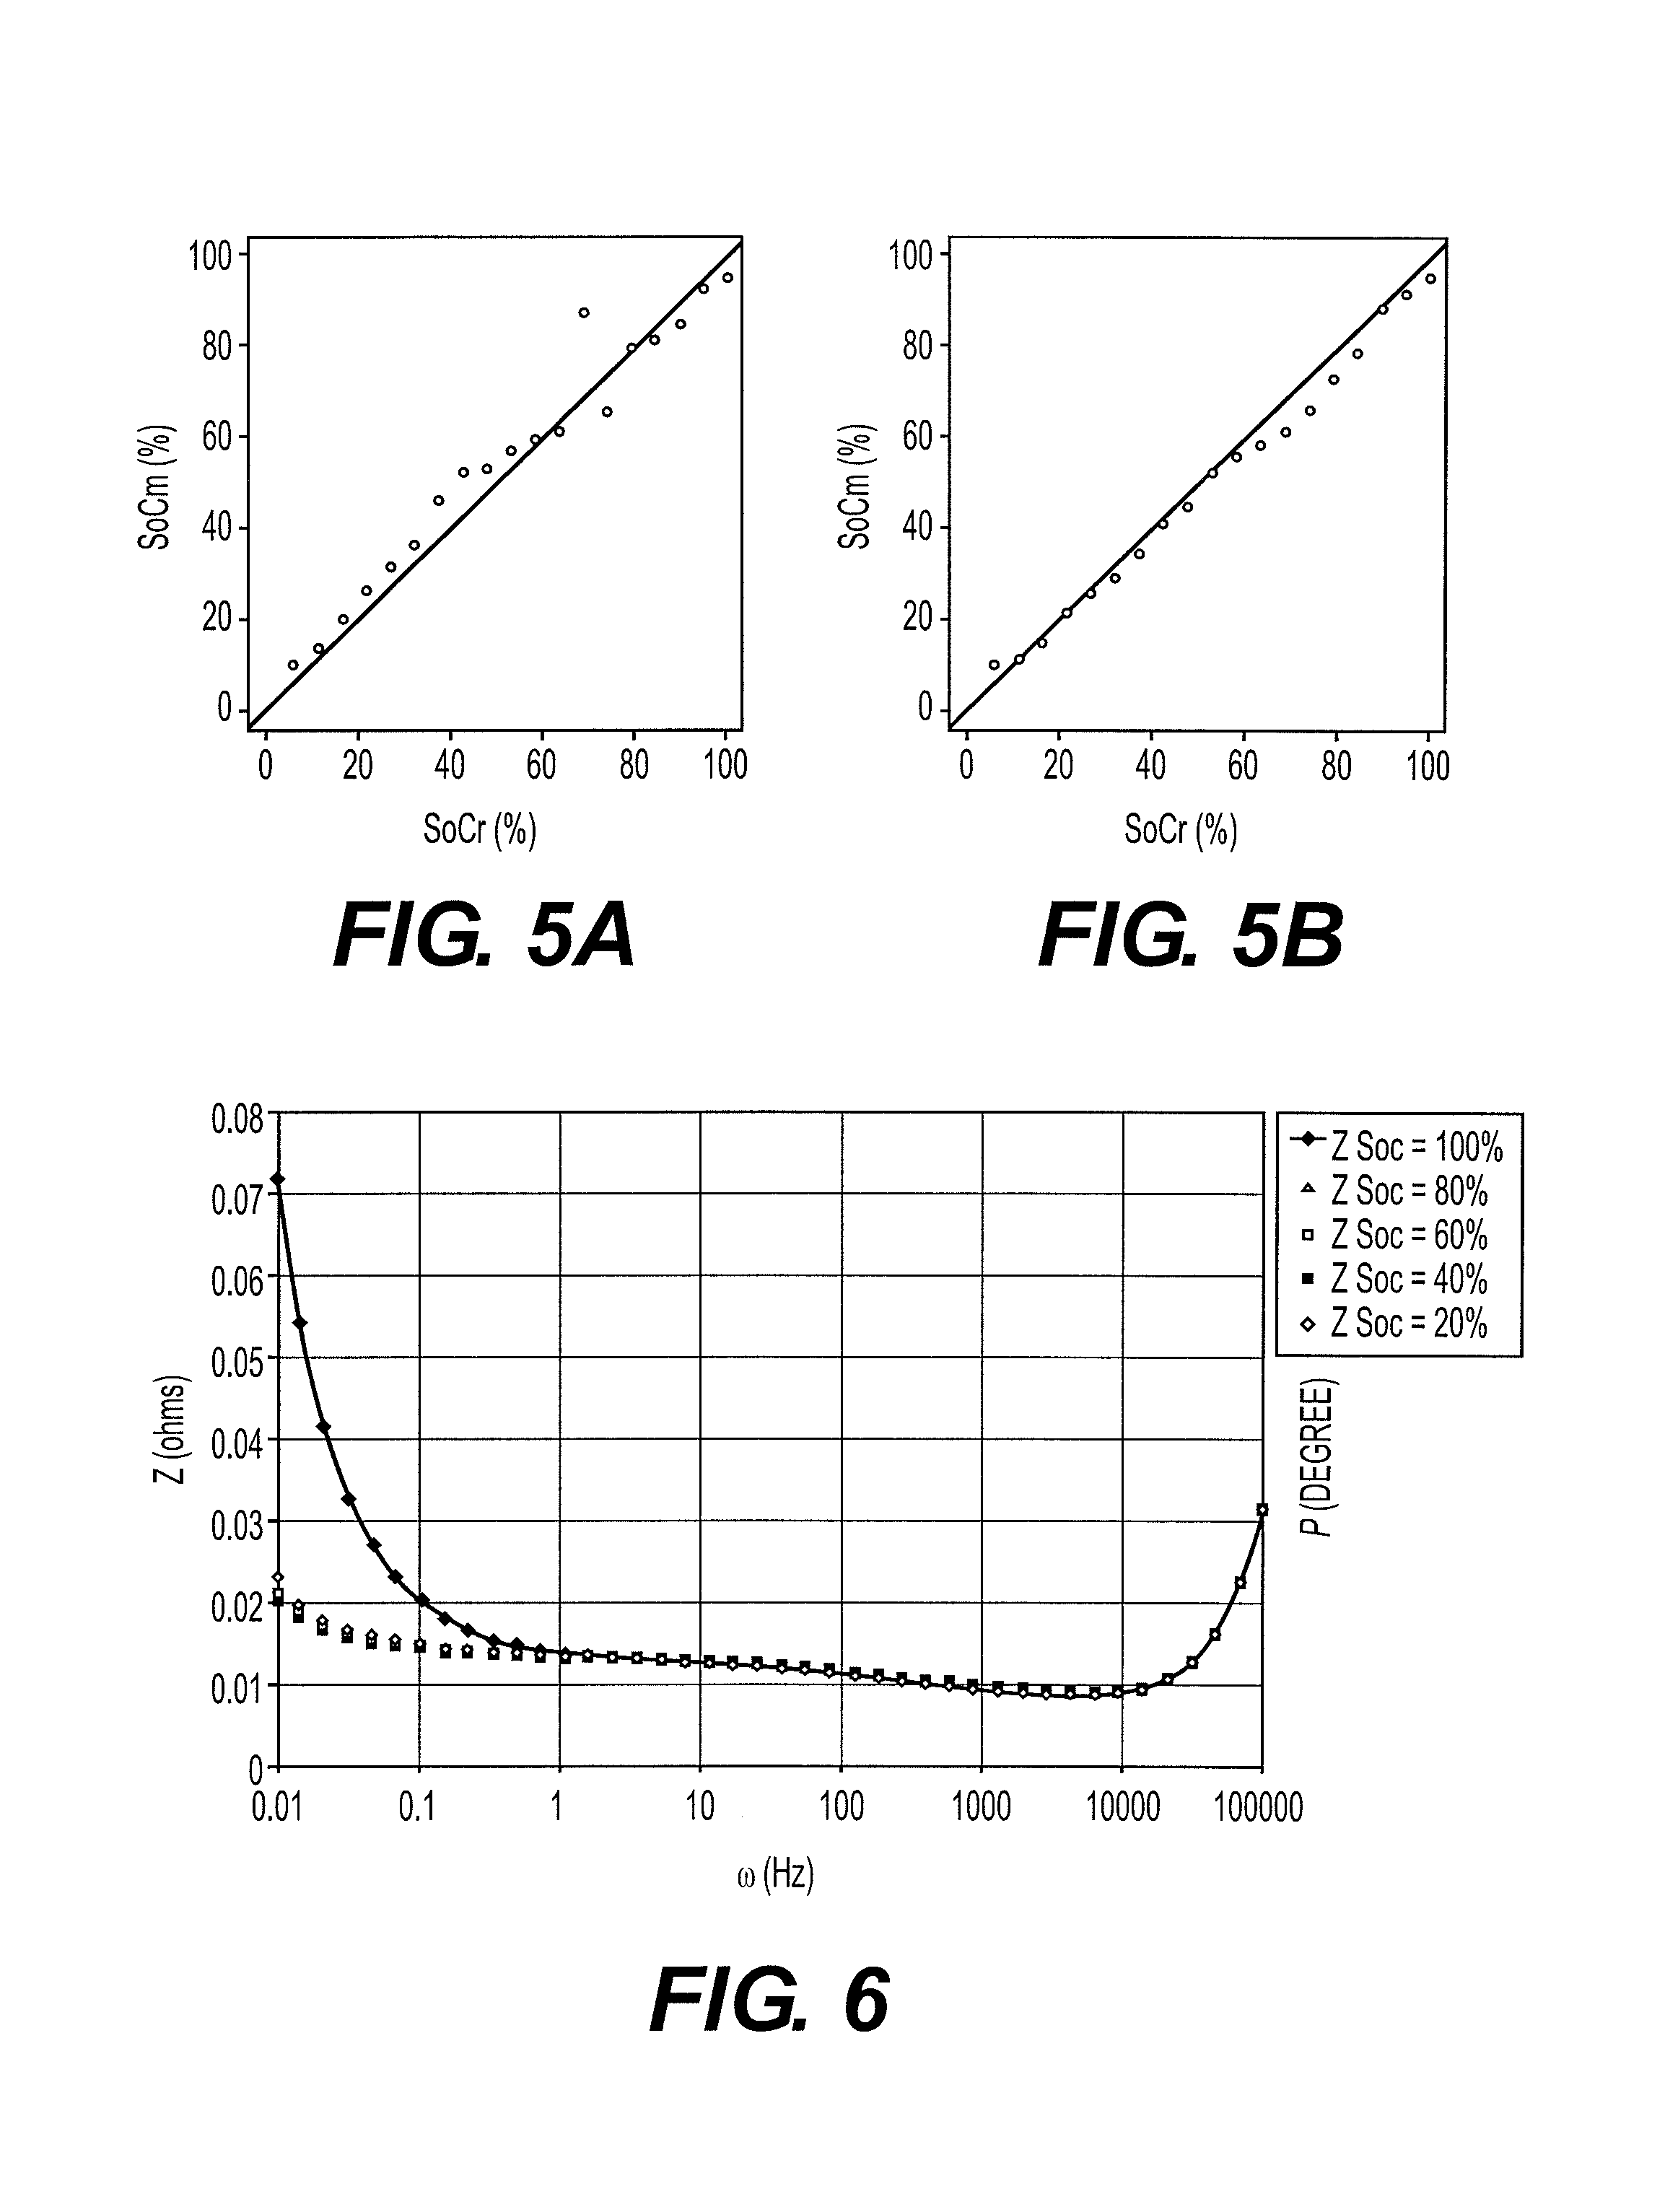 In-situ battery diagnosis method using electrochemical impedance spectroscopy